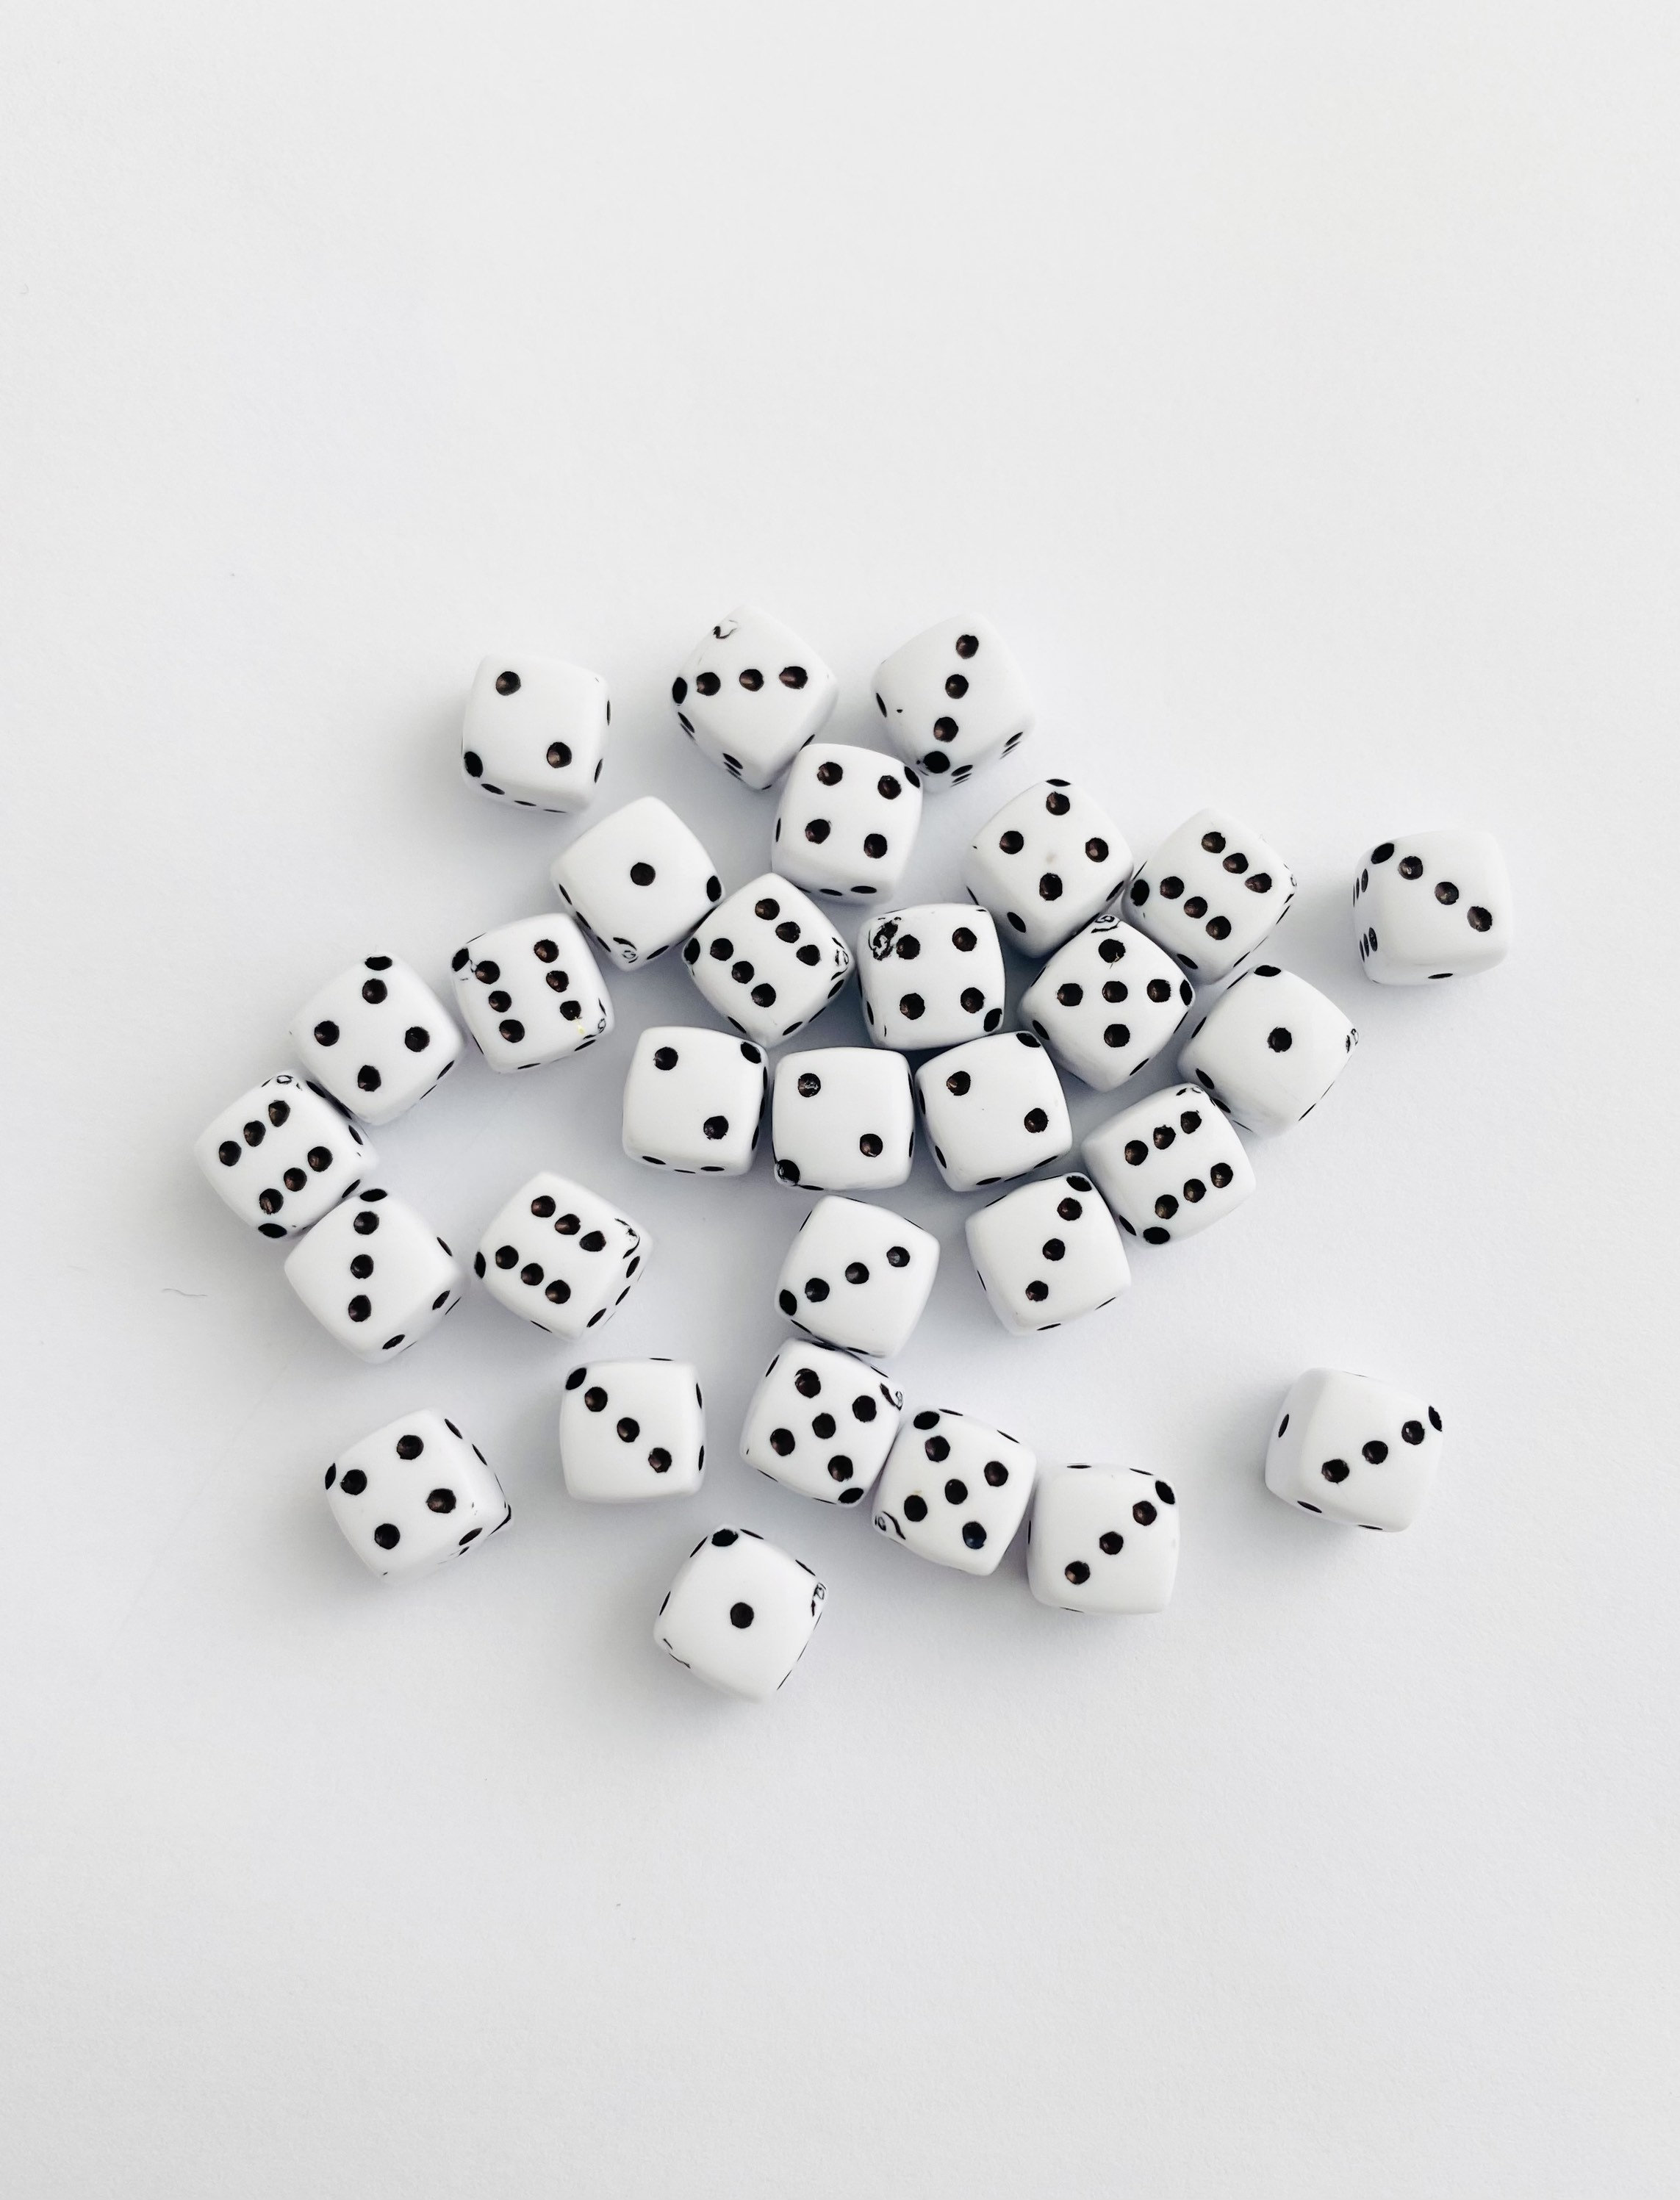 100 White Colour with Black Acrylic Cube Dice Beads 8X8mm Diagonal Hole  Funny